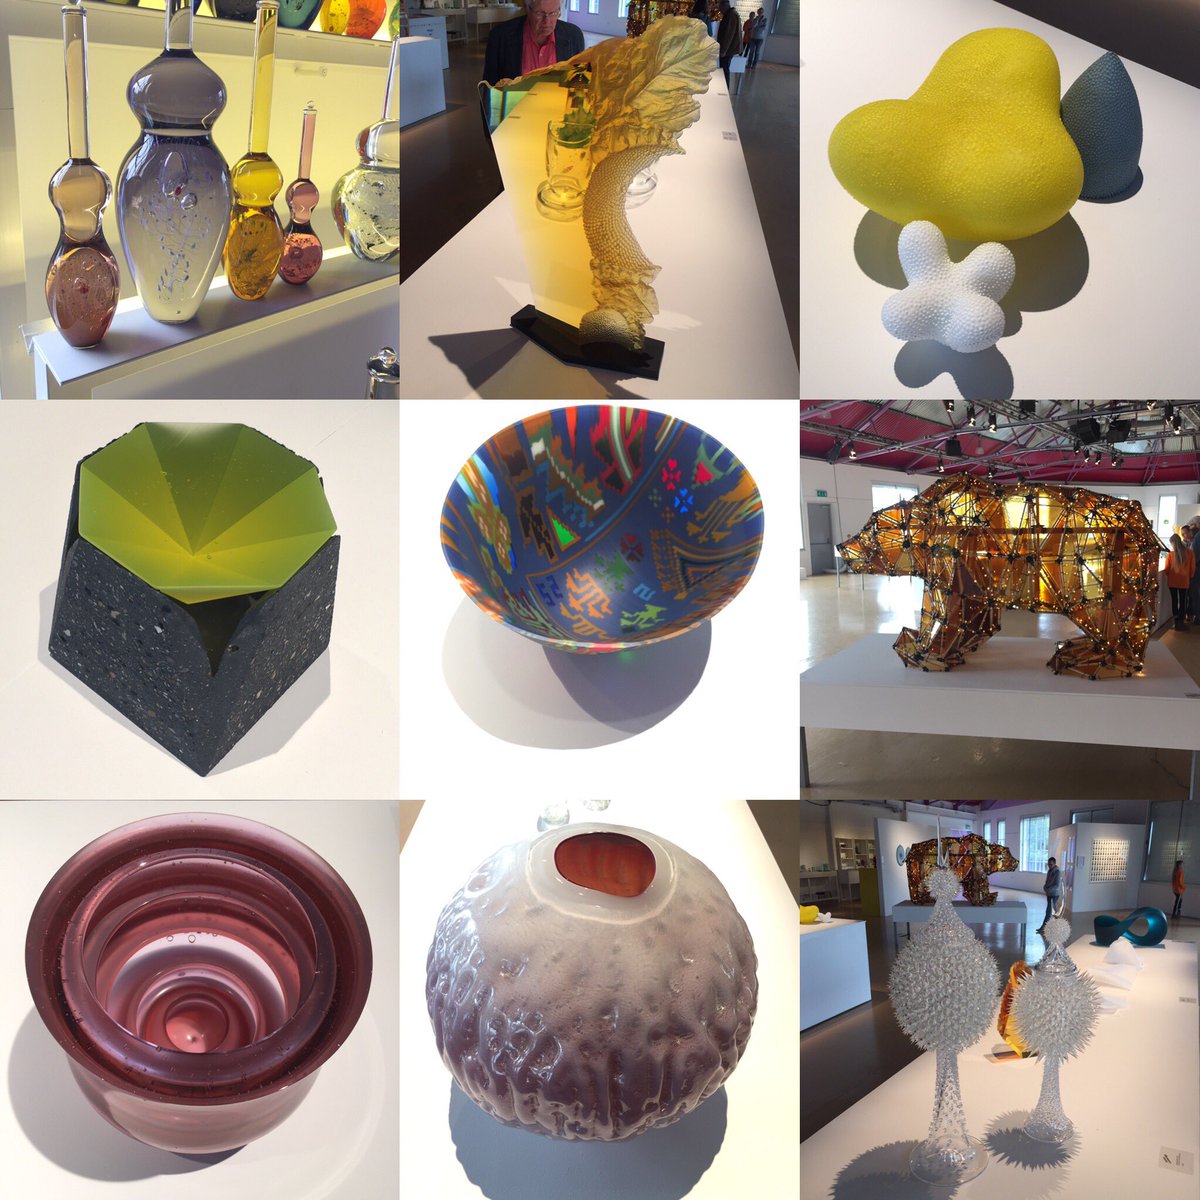 Fantastic range of work at this years #britishglassbiennale at the Ruskin Centre in Stourbridge. On  till the 9th. Go celebrate craft!